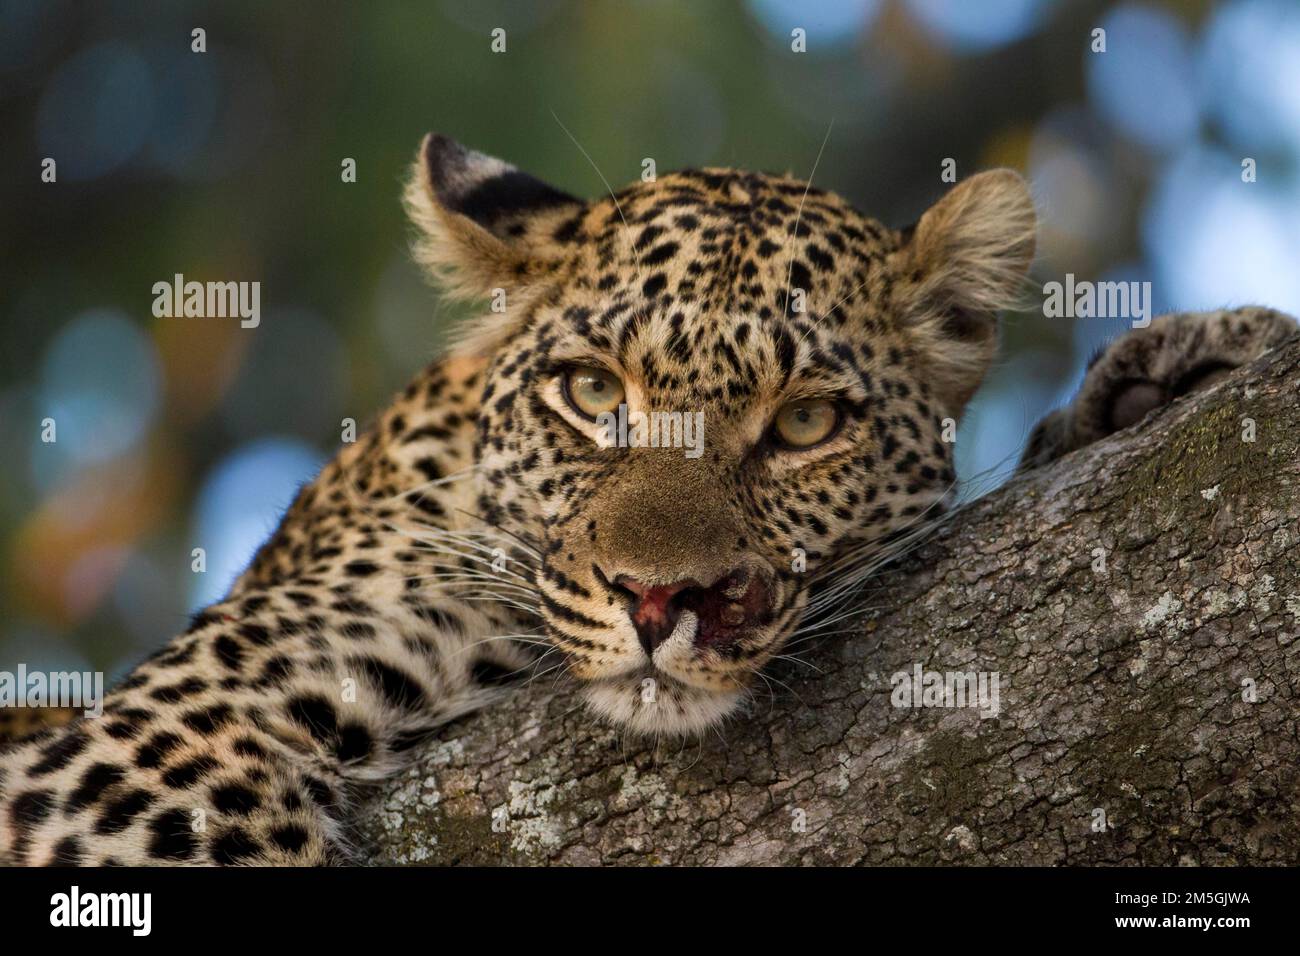 Injured leopard (Panthera pardus) on a tree, looks straight at the camera, black and white apart from the golden eyes, Botswana Stock Photo